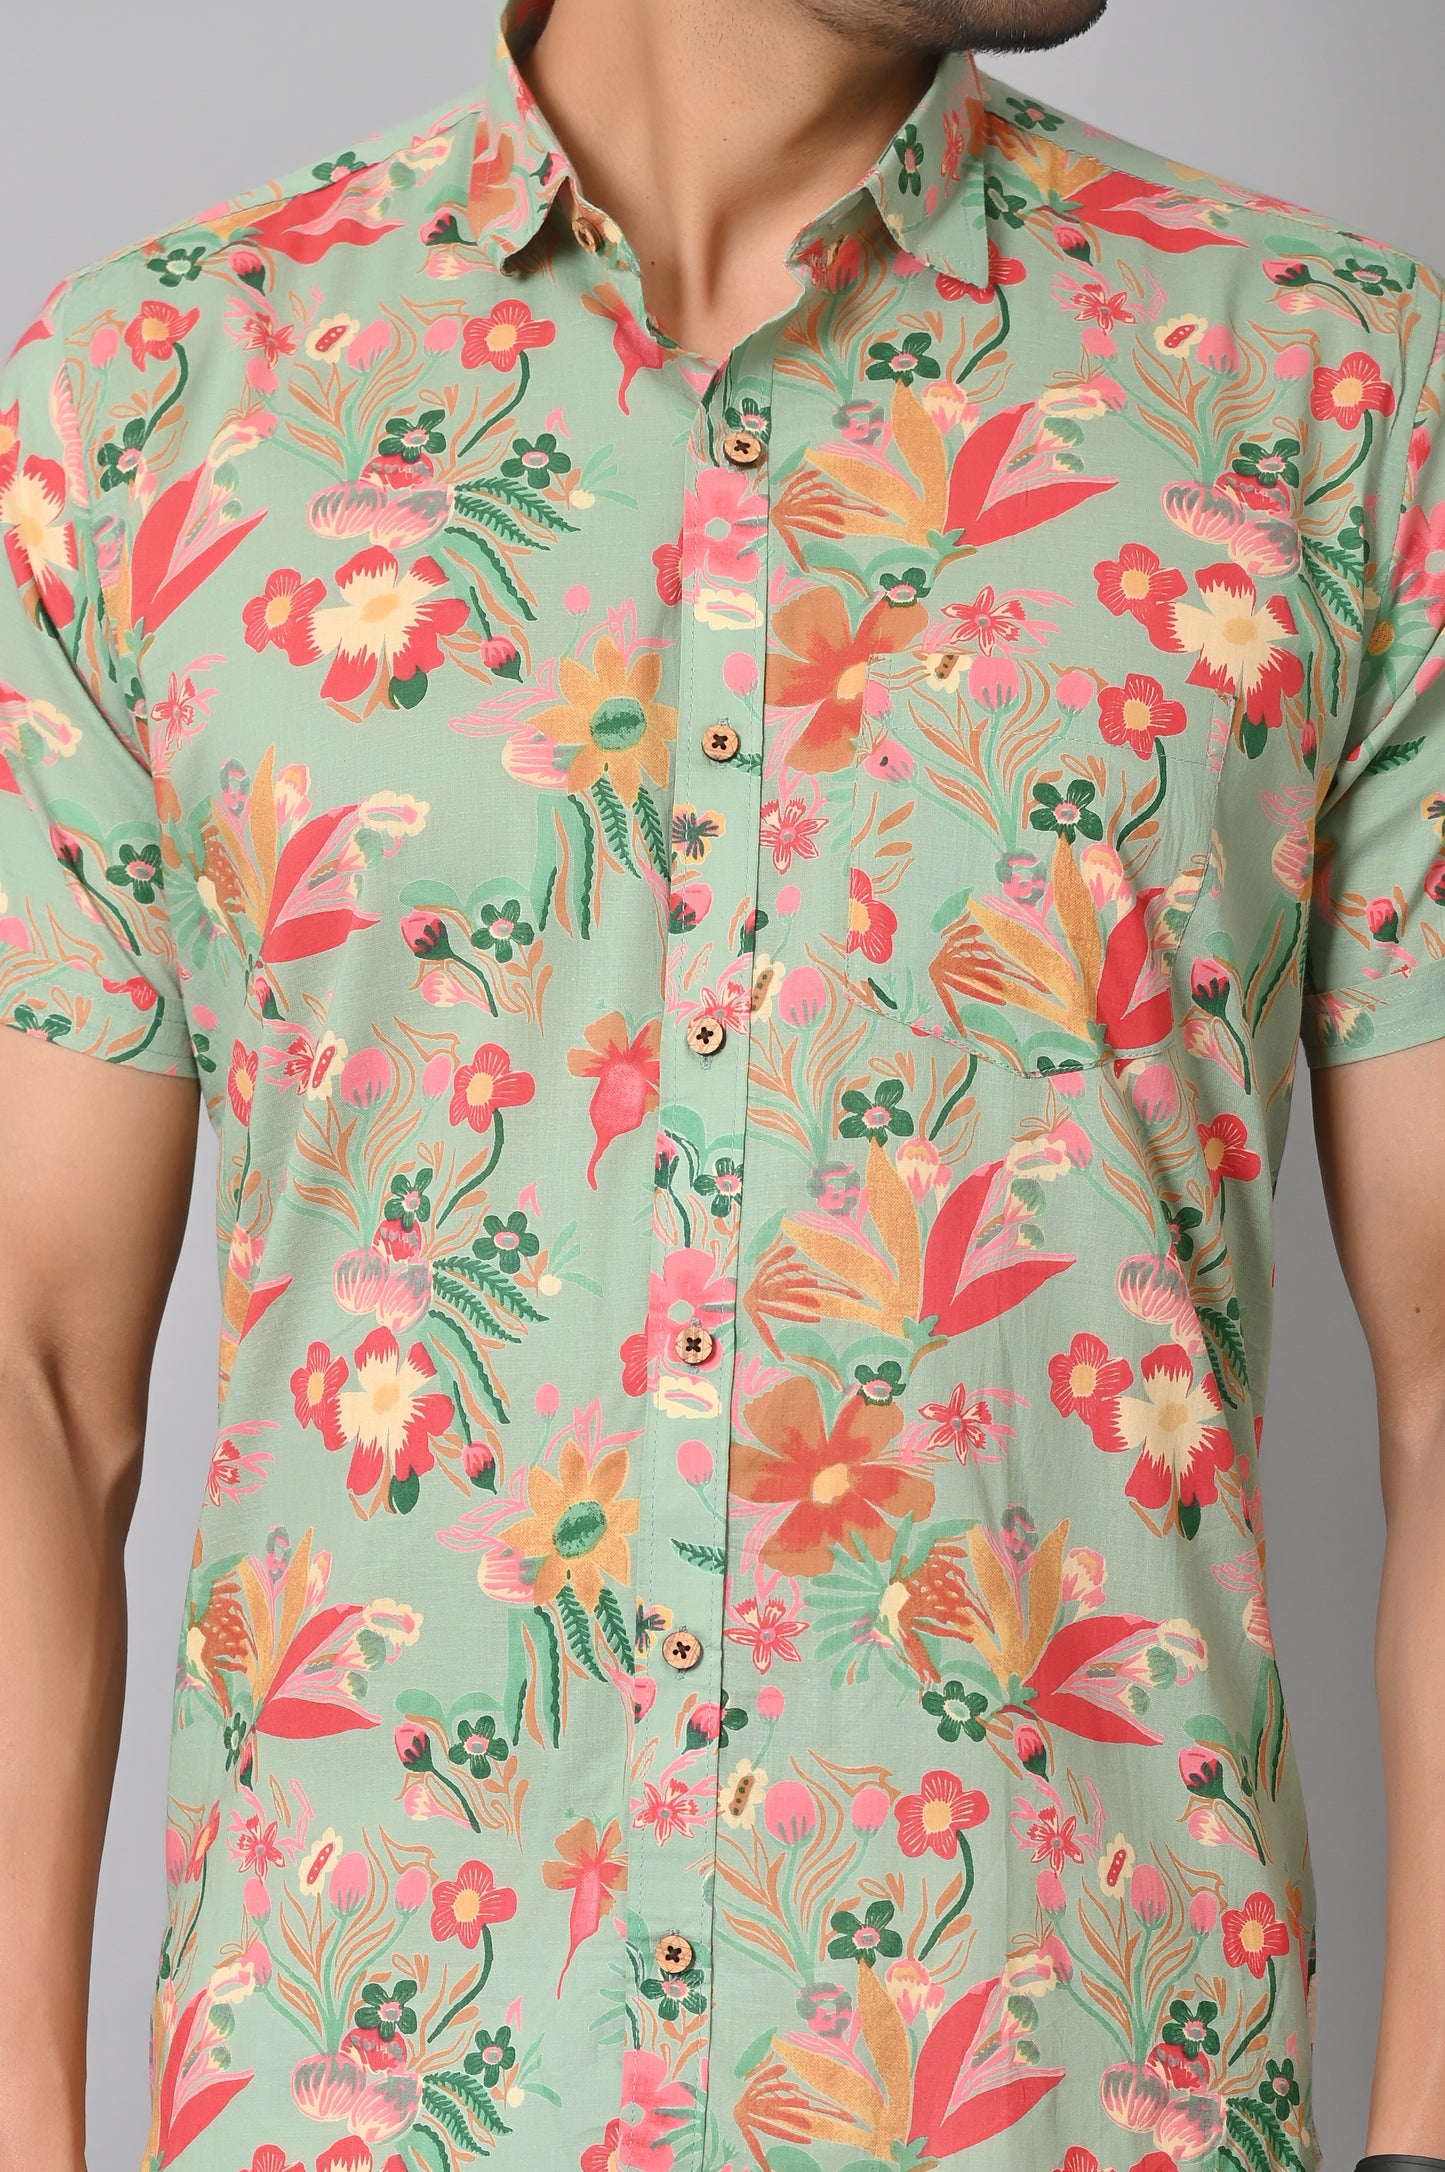 VJR Party Attraction Floral Print Green Base Premium Shirt